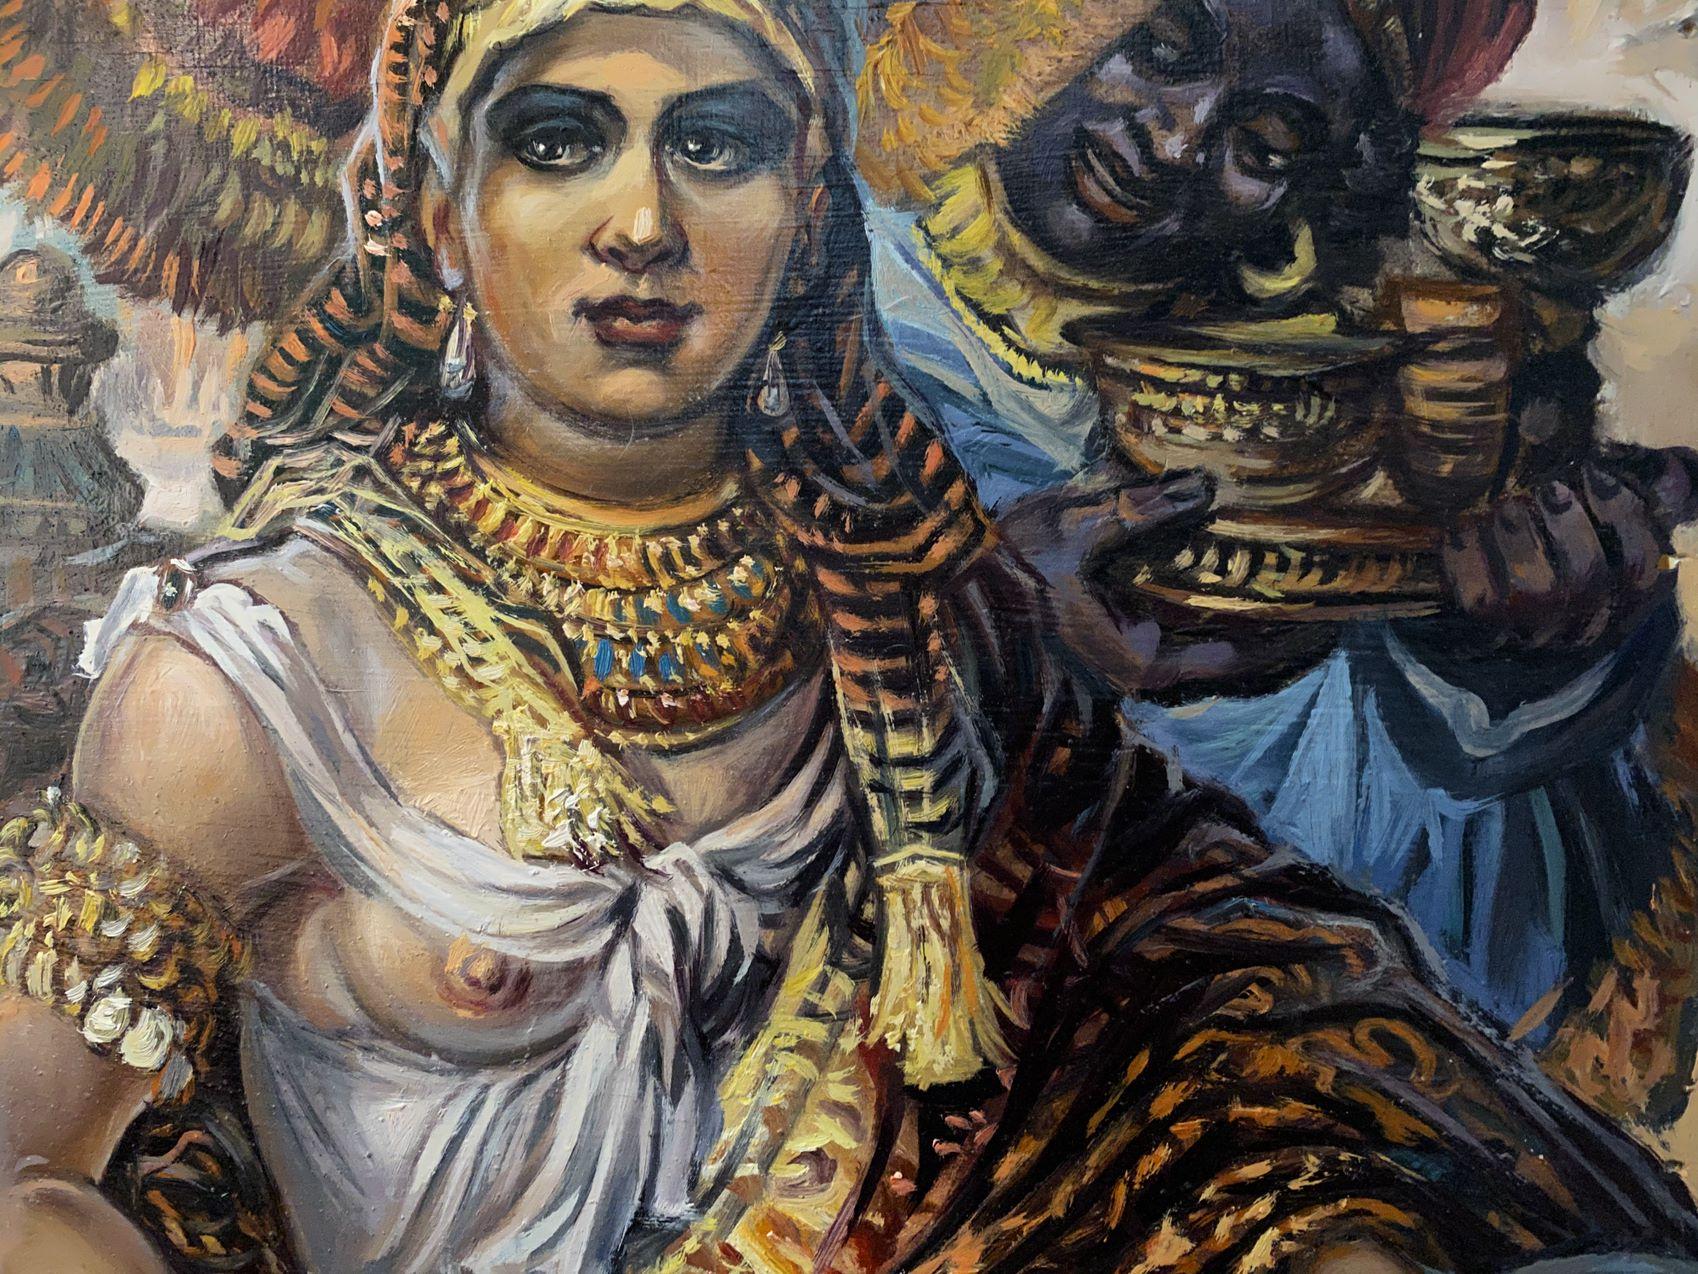 Cleopatra, Portrait, Original oil Painting, Ready to Hang - Black Figurative Painting by Alexander Litvinov